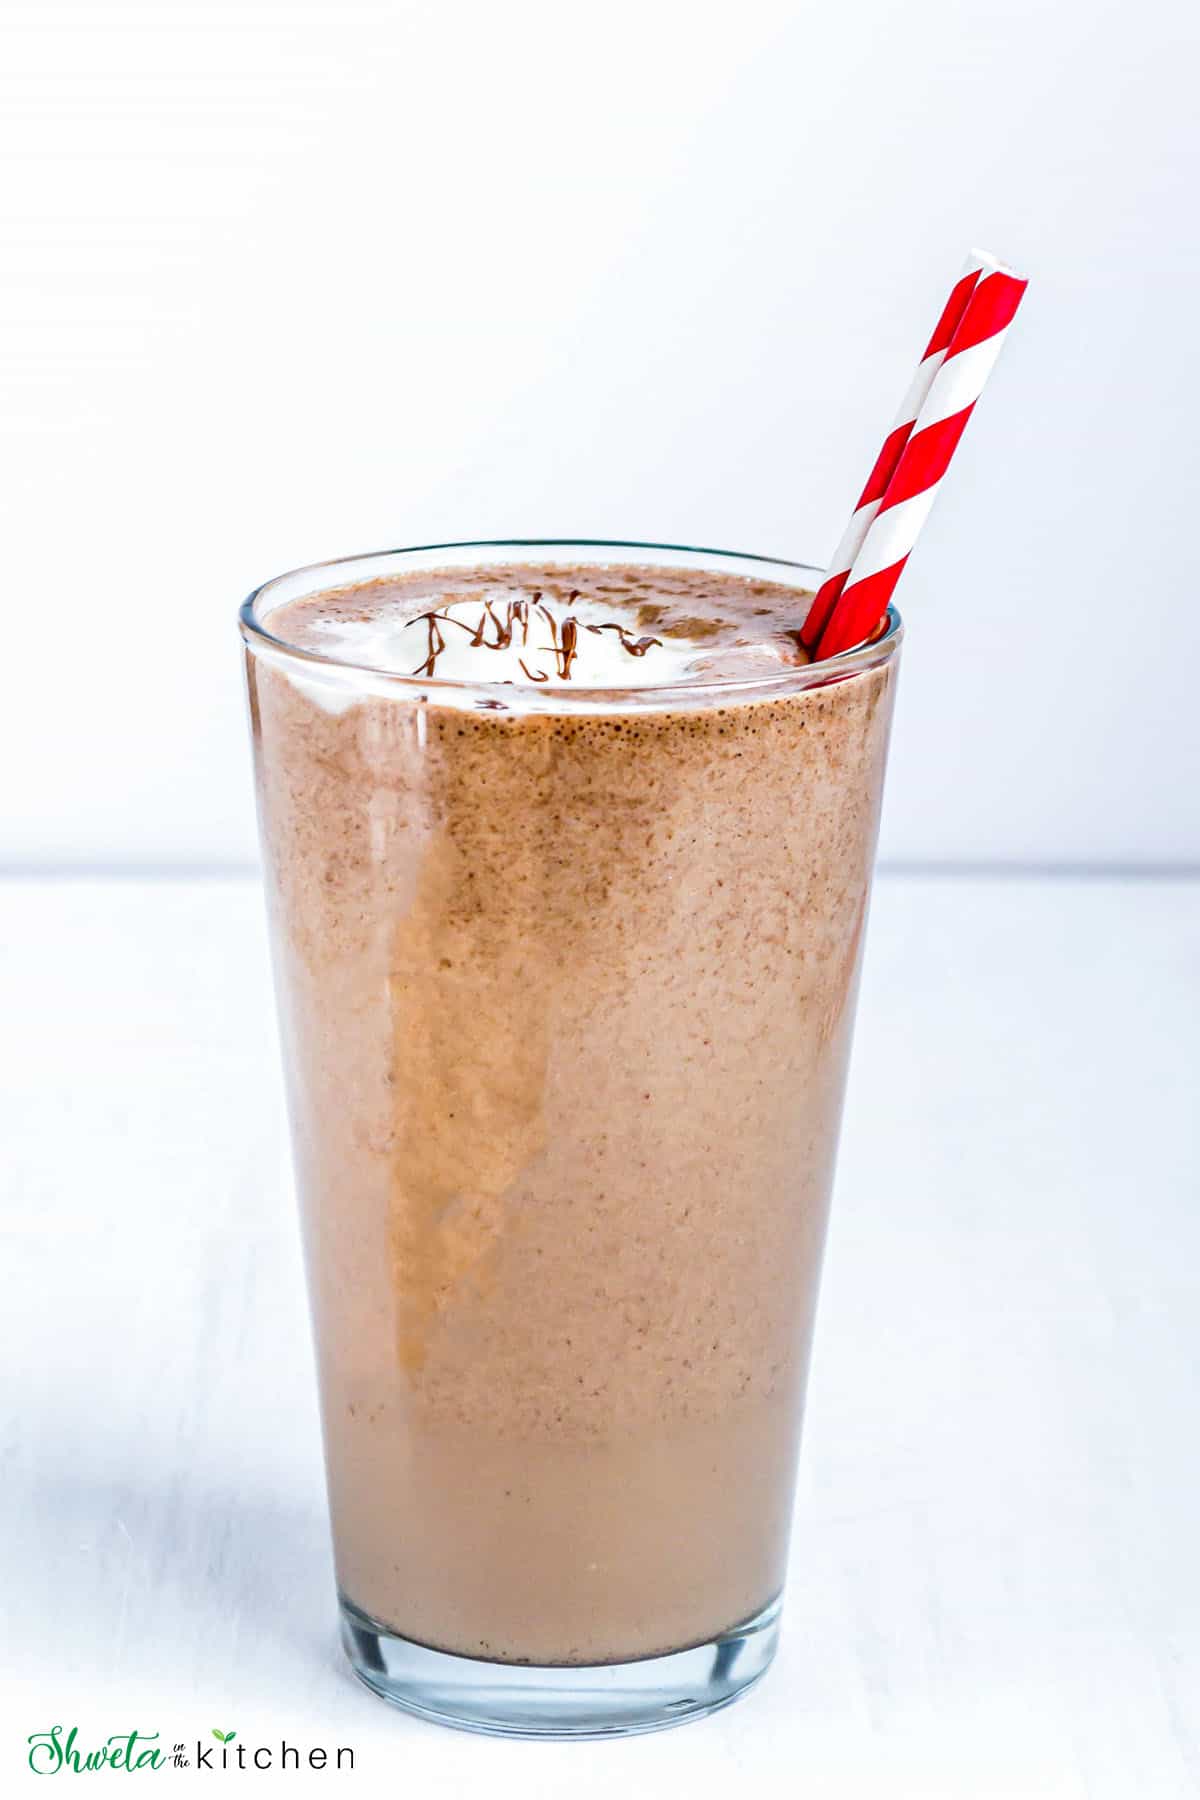 Nutella Milkshake in a glass with red striped straw